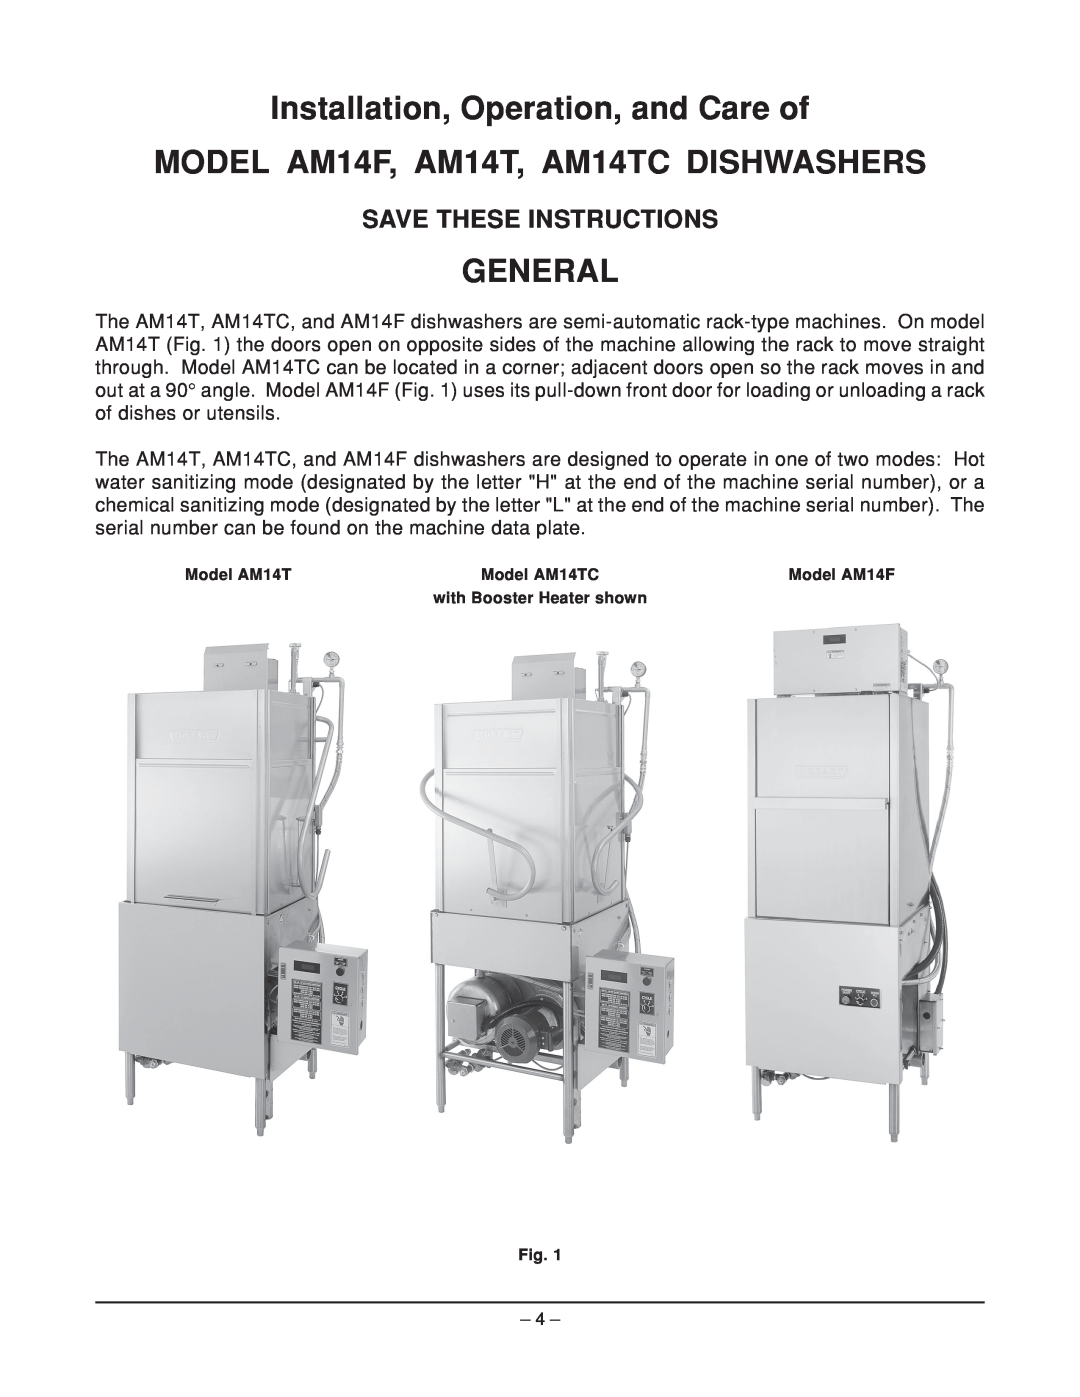 Hobart Installation, Operation, and Care of, MODEL AM14F, AM14T, AM14TC DISHWASHERS, General, Save These Instructions 